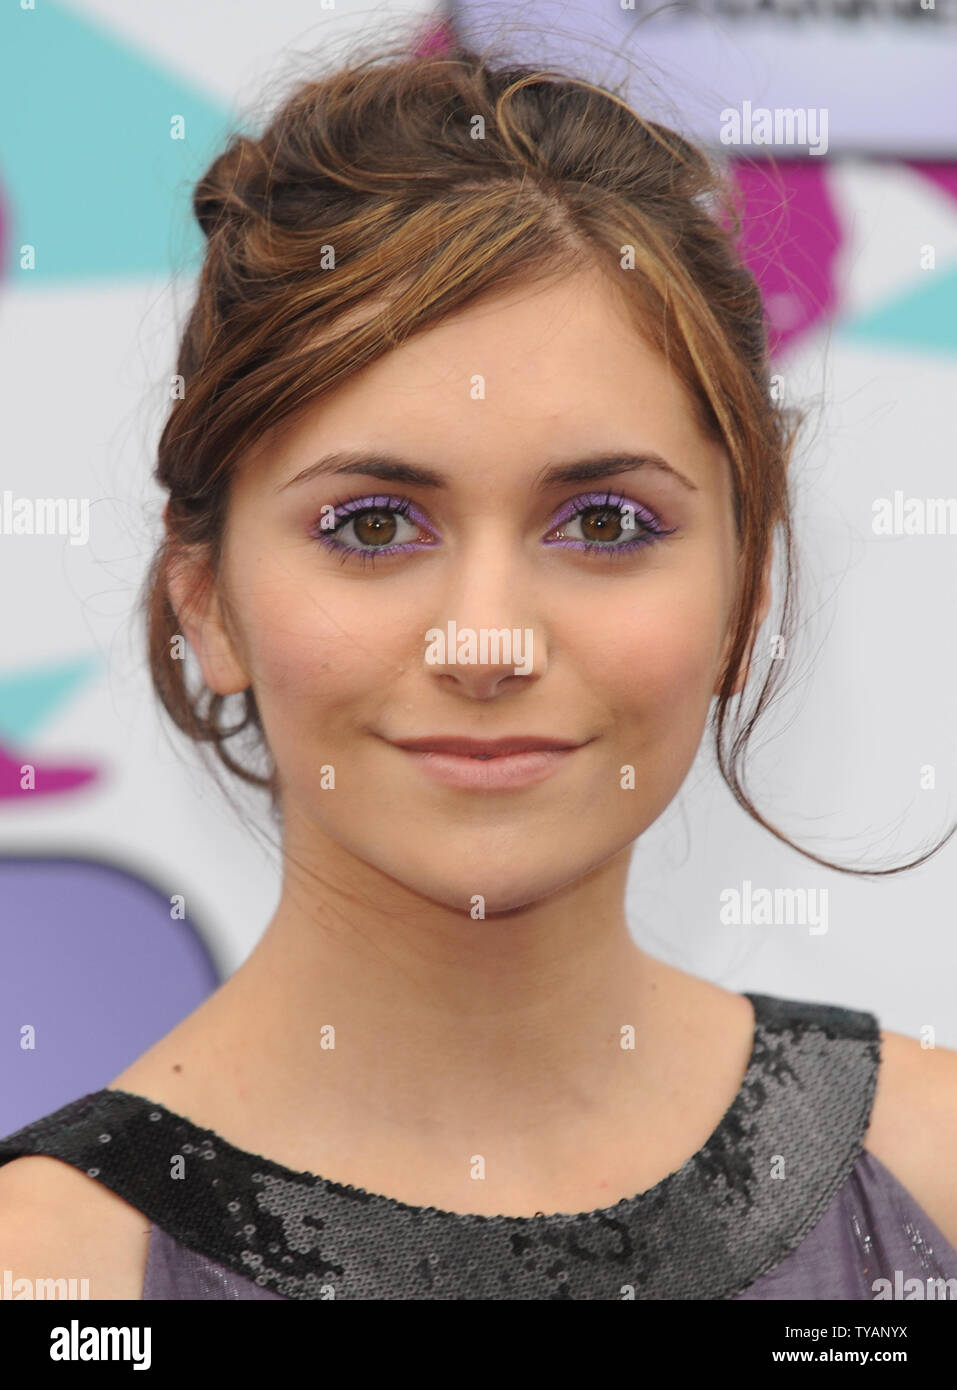 American actress Alyson Stoner attends the European premiere of 'Camp Rock' at Royal Festival Hall in London on September 10, 2008.  (UPI Photo/Rune Hellestad) Stock Photo